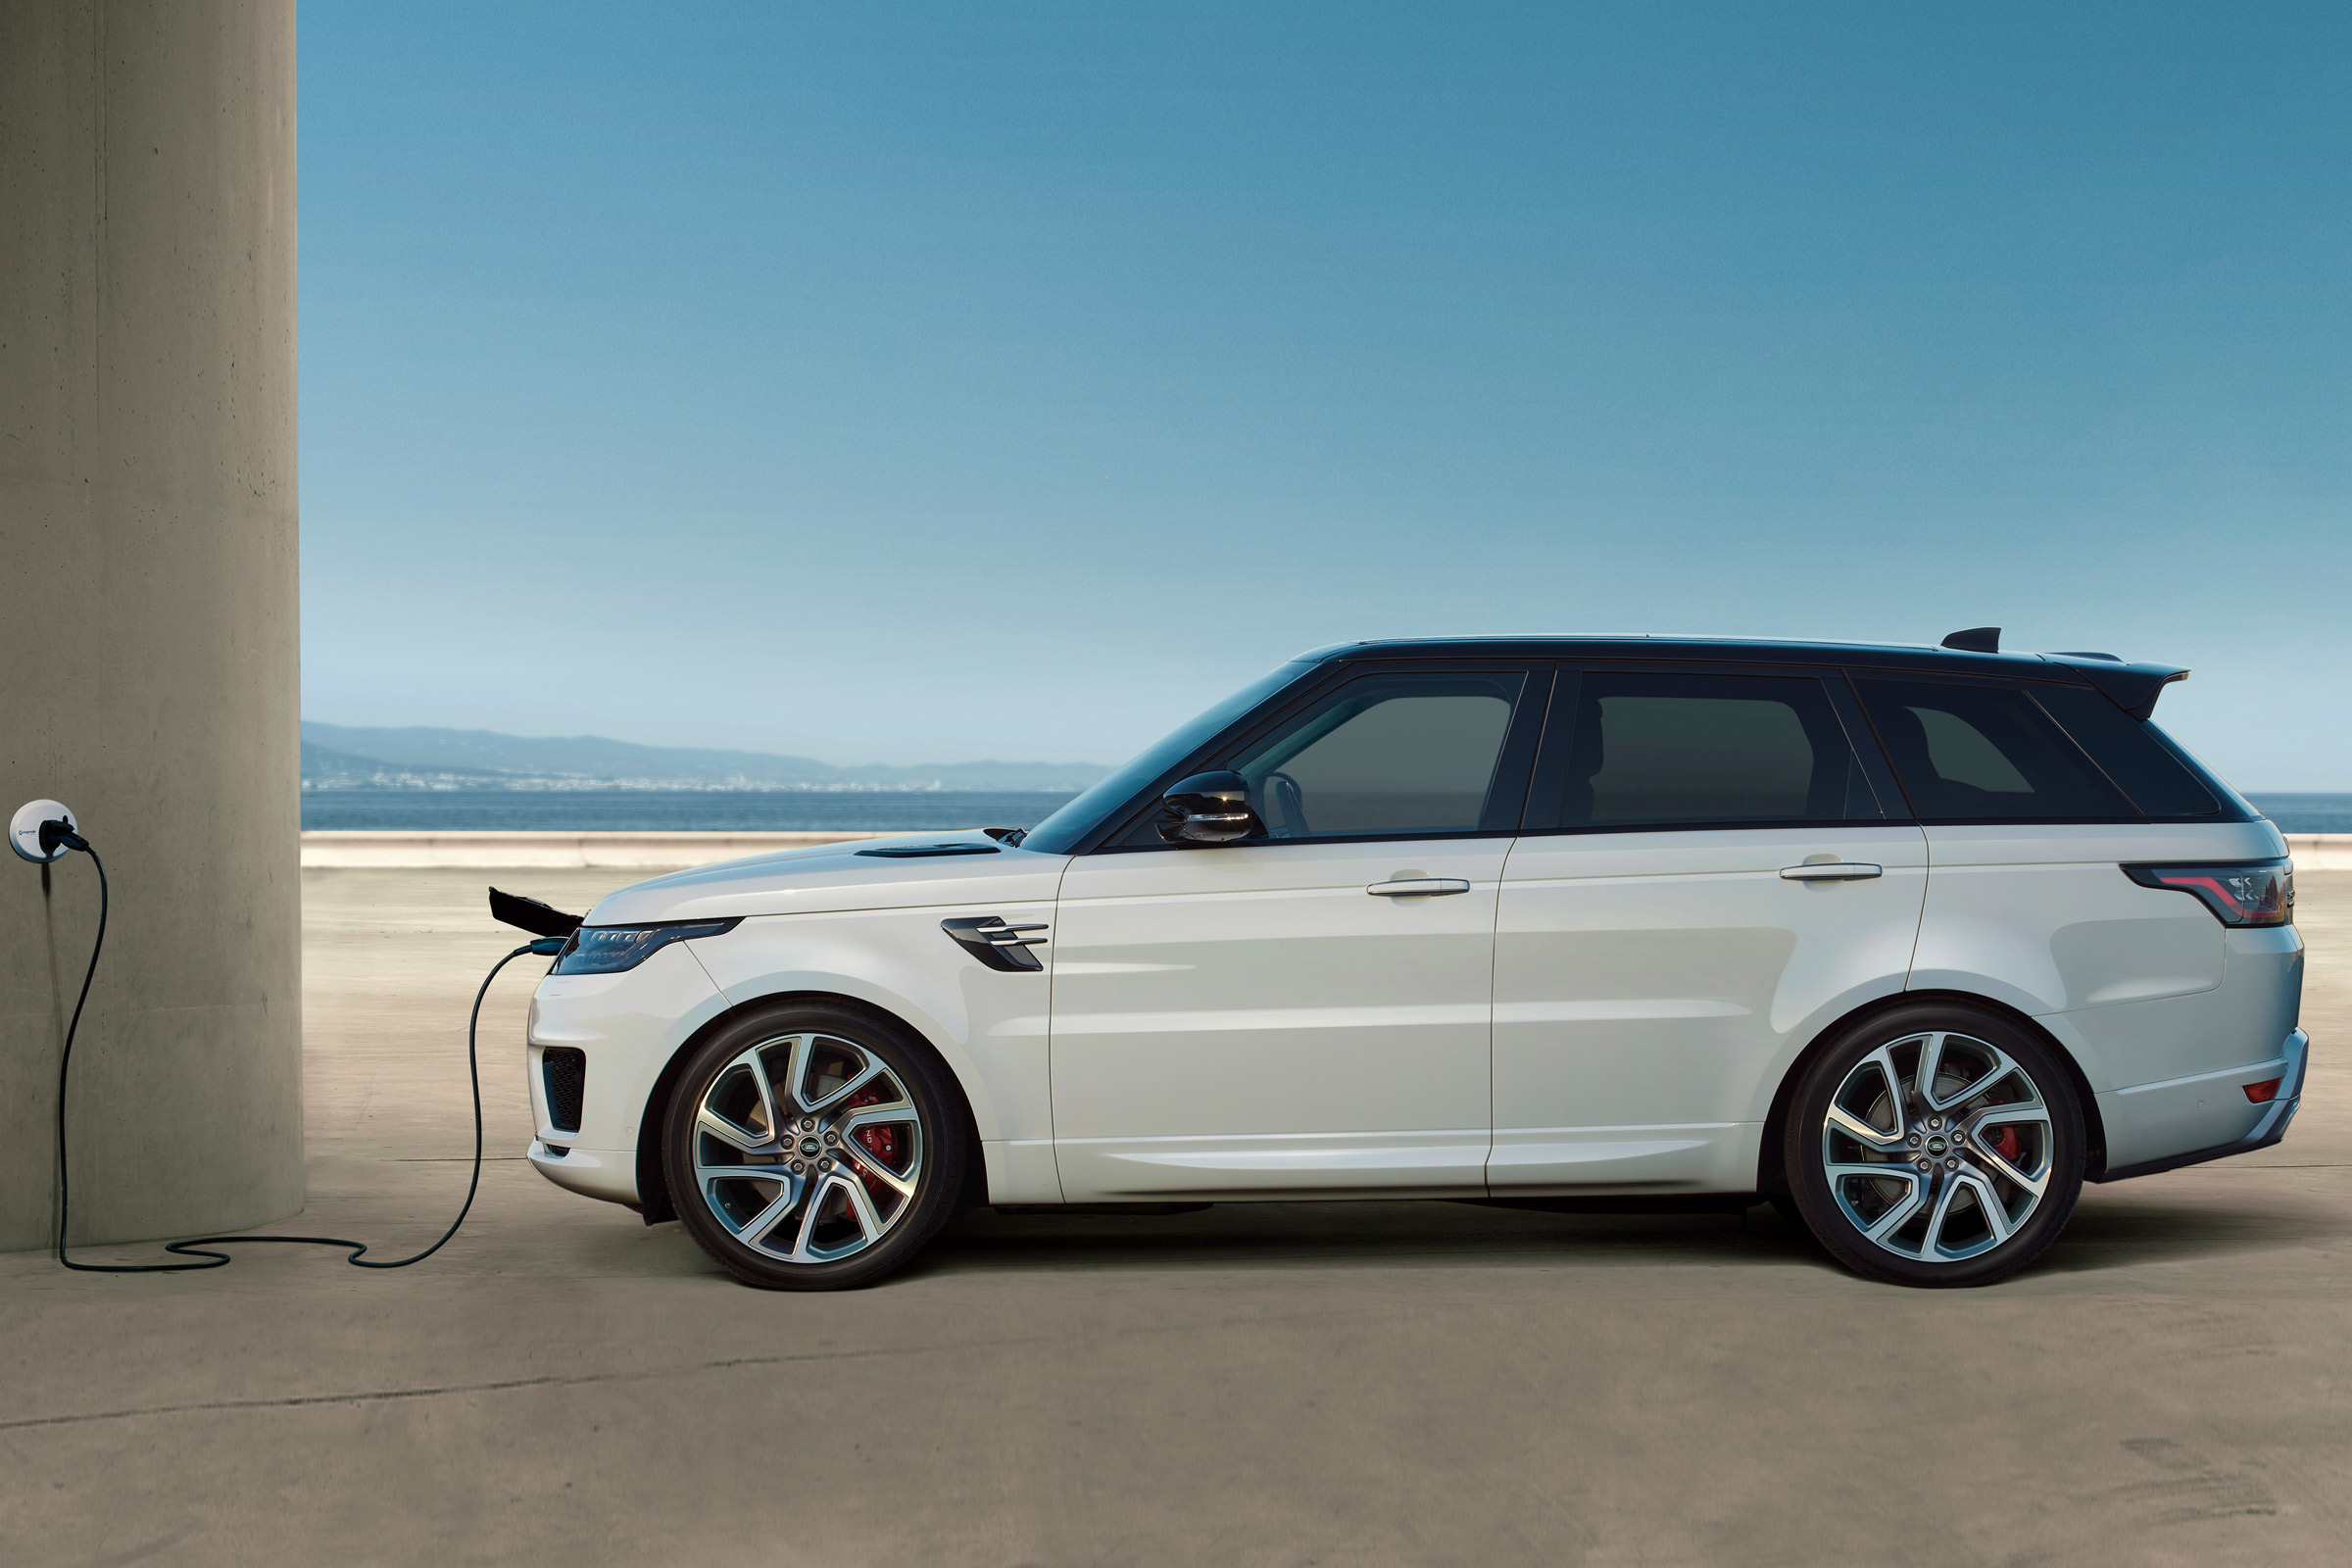 Range Rover Sport PHEV running costs DrivingElectric